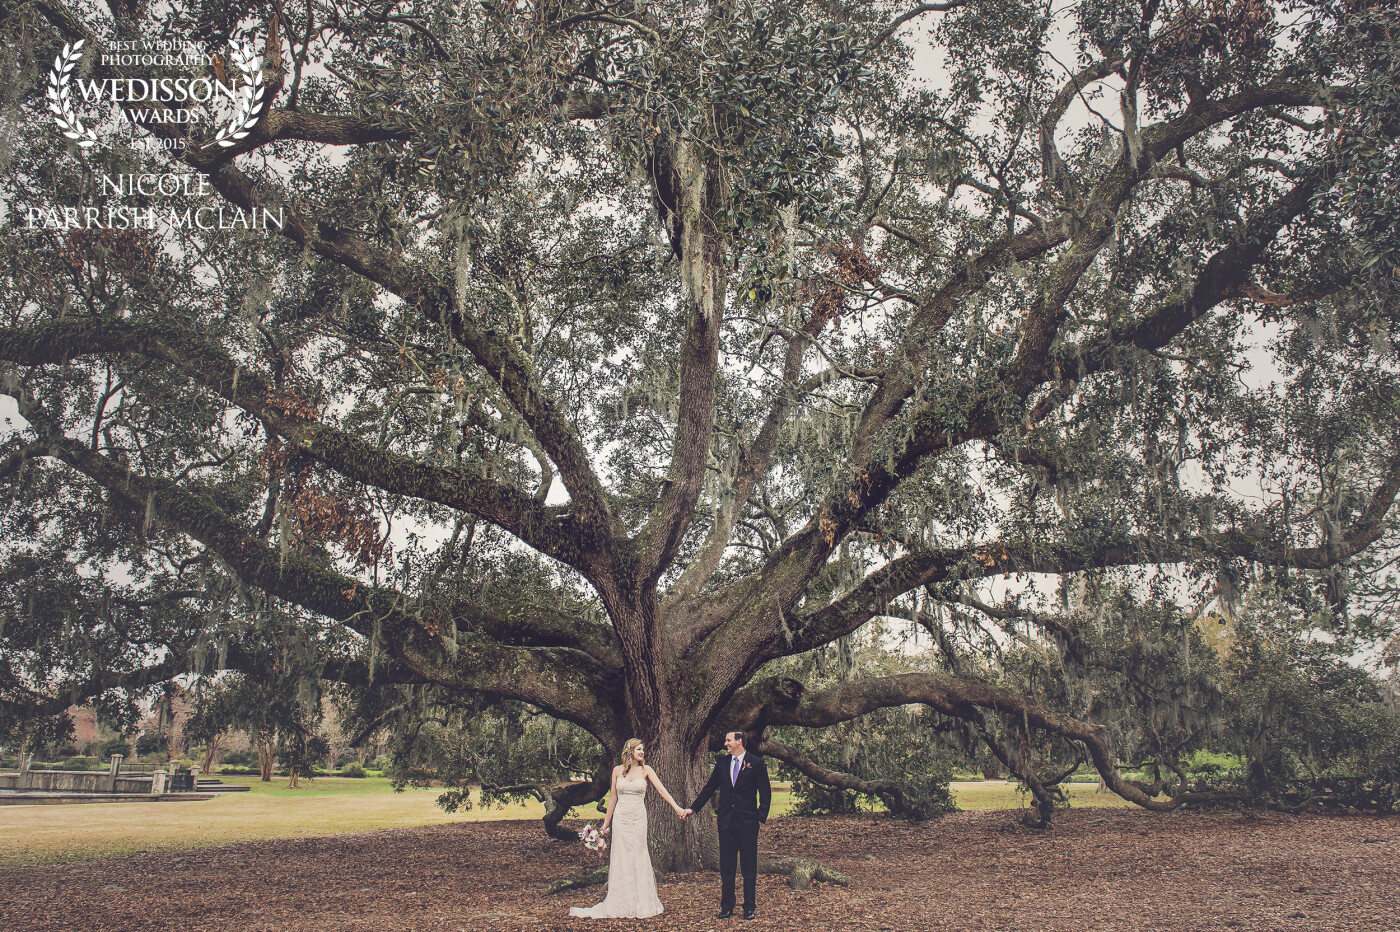 I was fortunate enough to be asked to document my brothers sweet wedding.  Robert and Lisa were married on the first day of the new year, under one of our gorgeous grand live oaks, here in Charleston.  Such a special day for both of them, and our whole family.  